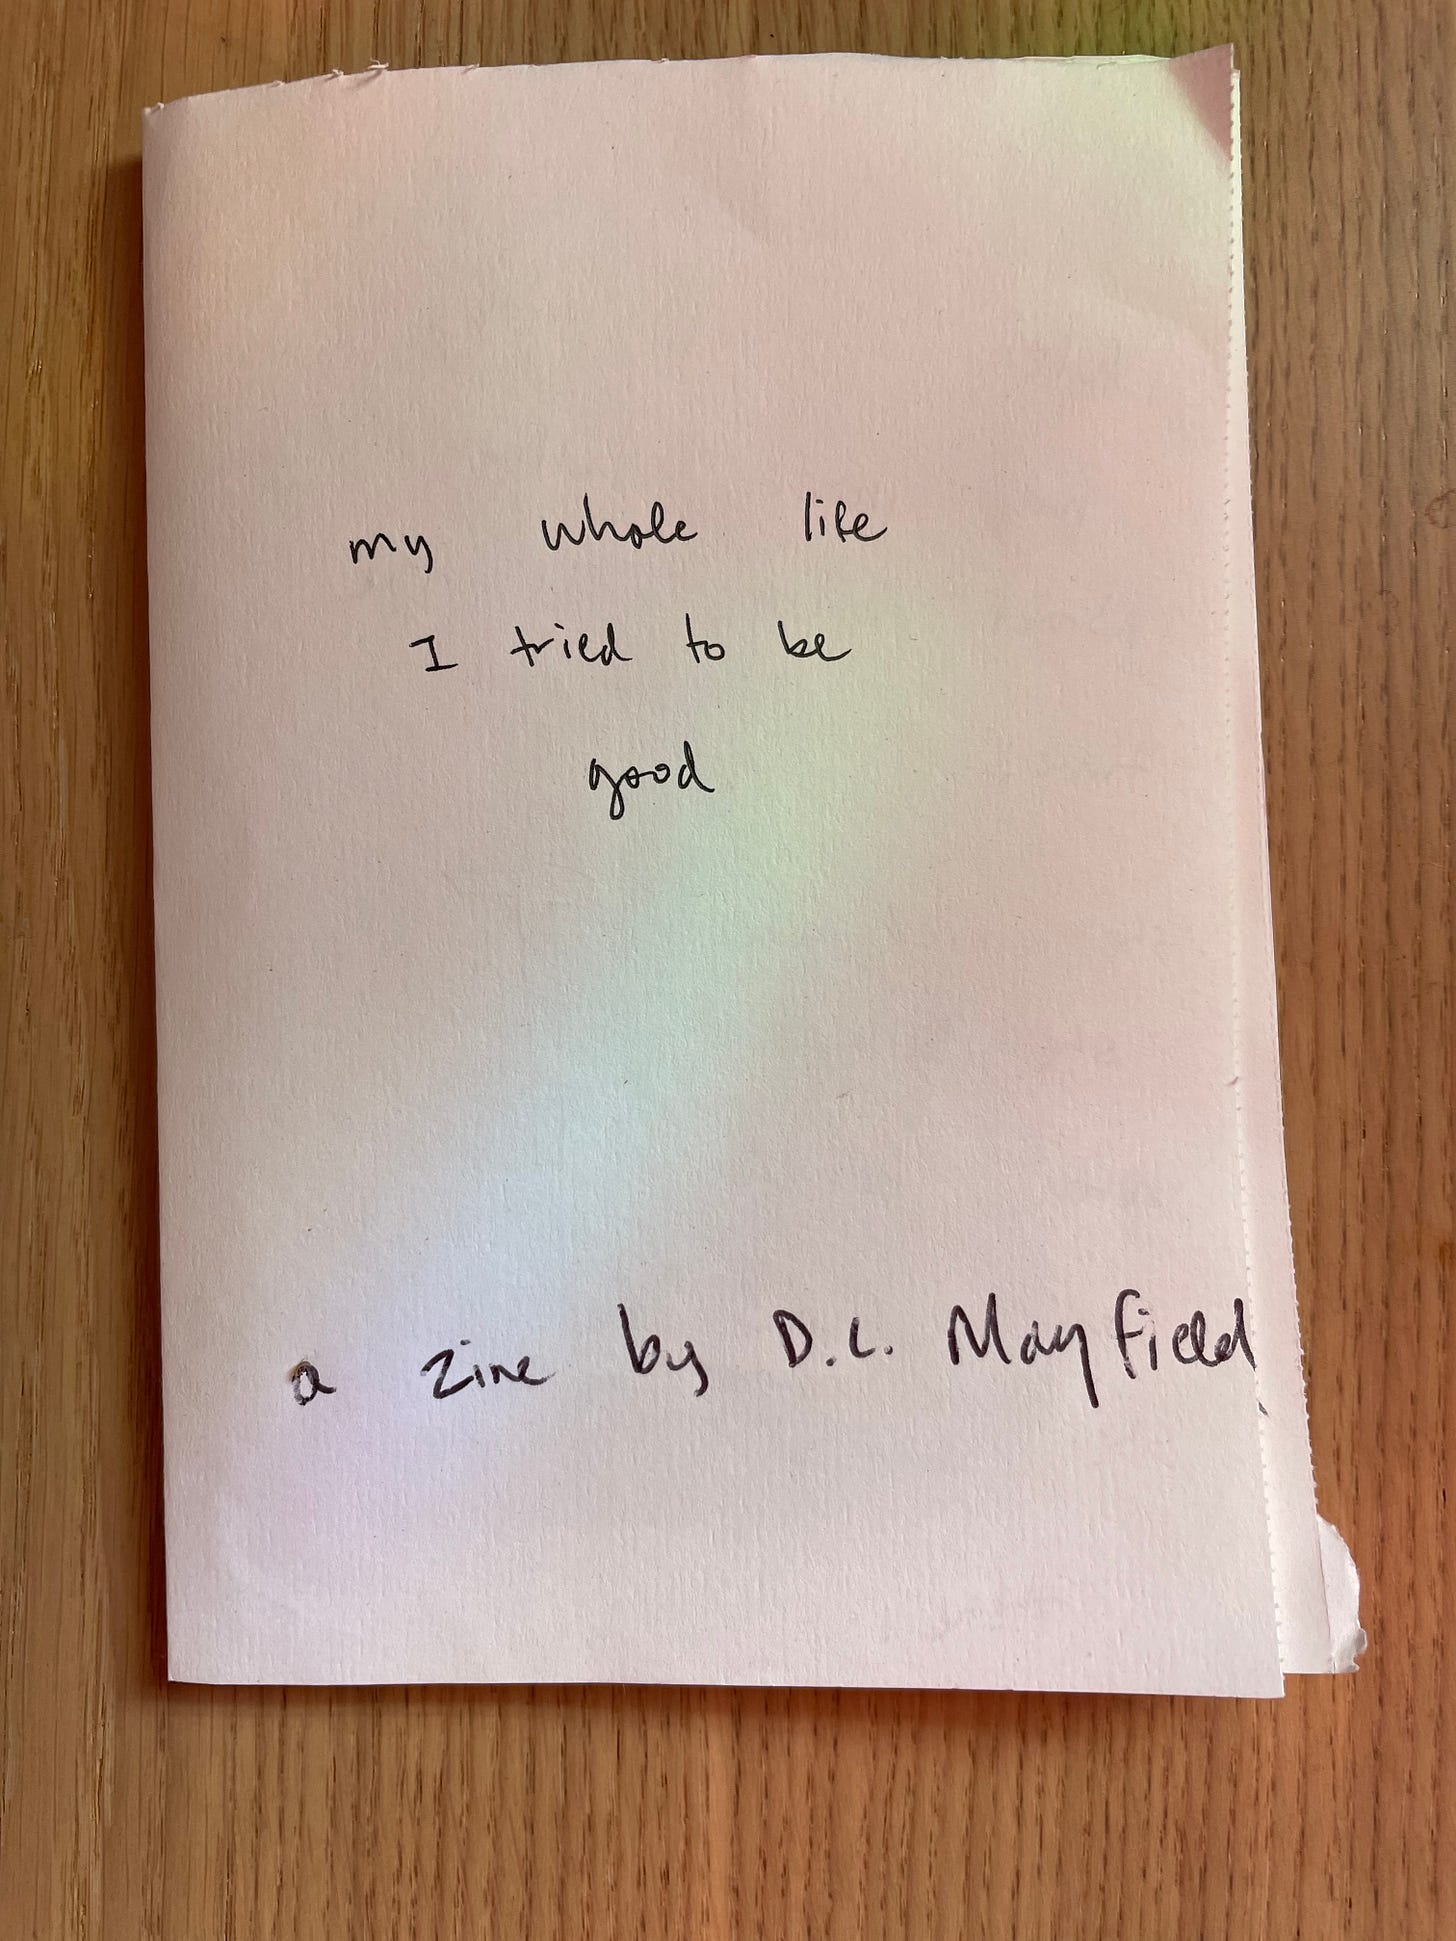 small white booklet in handwriting it says my whole life I tried to be good a zine by d.l. mayfield